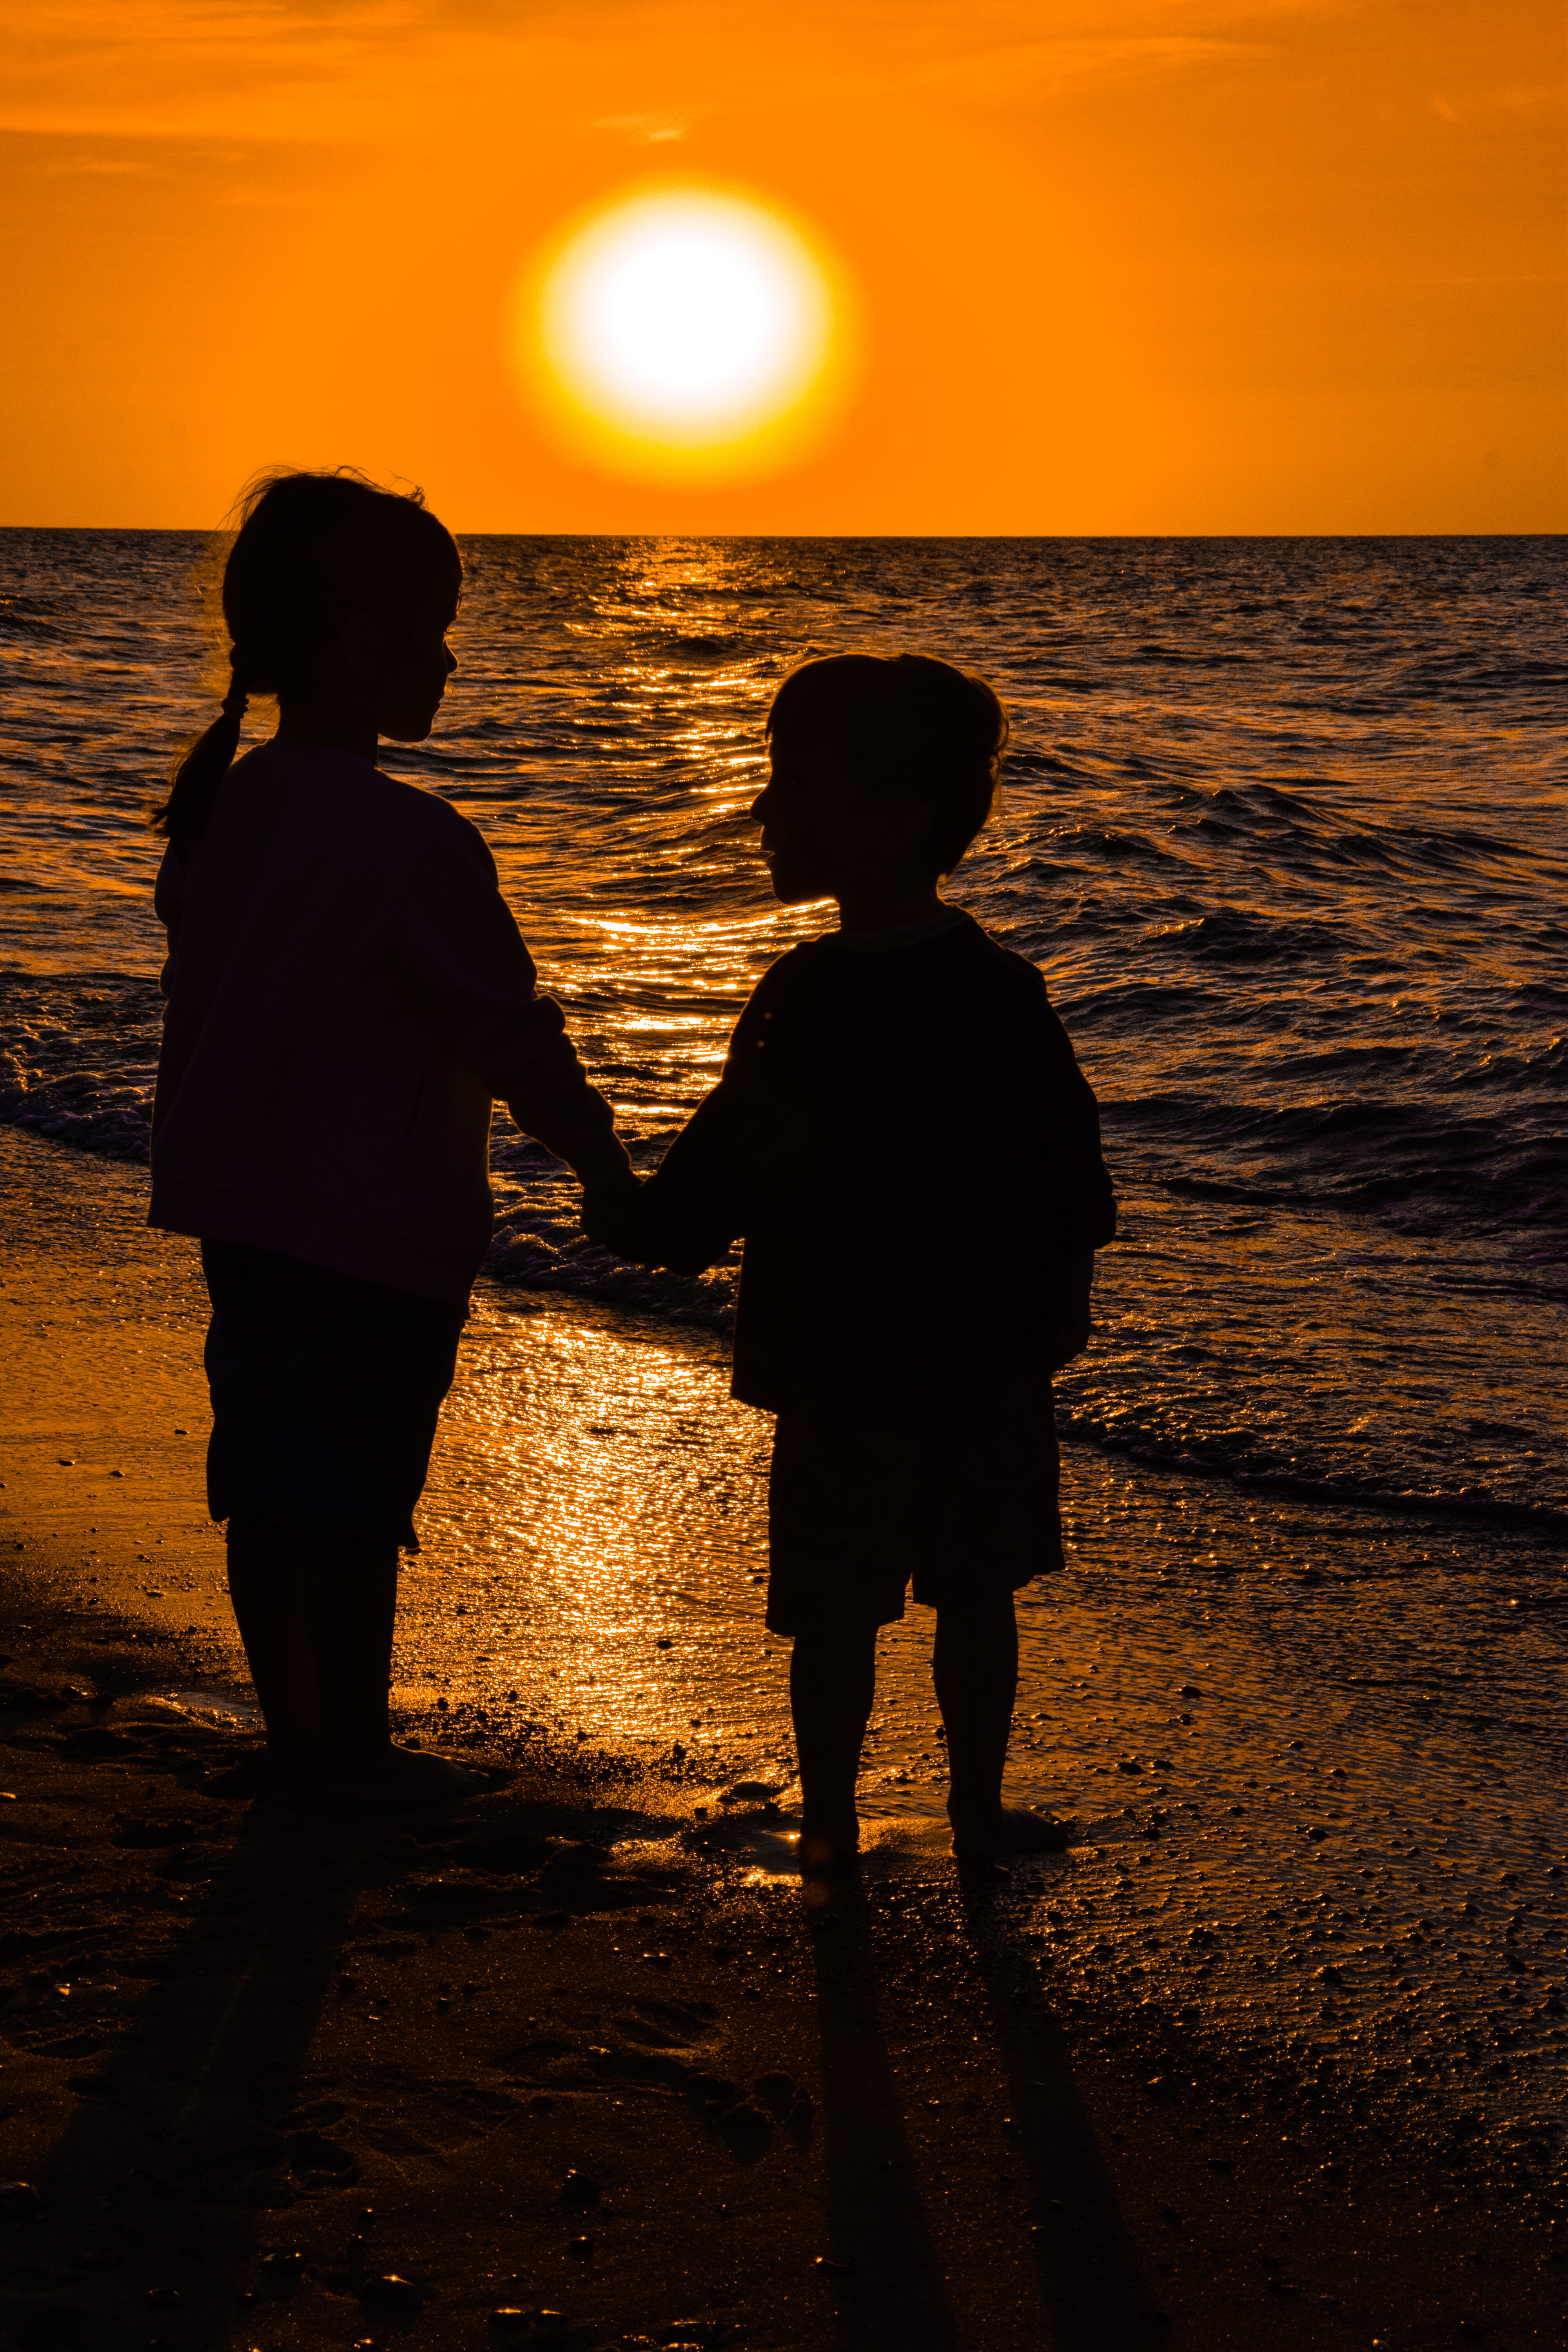 Child Girl And Boy Holding Hands In Front Of Sea At Sunset Free Image Download